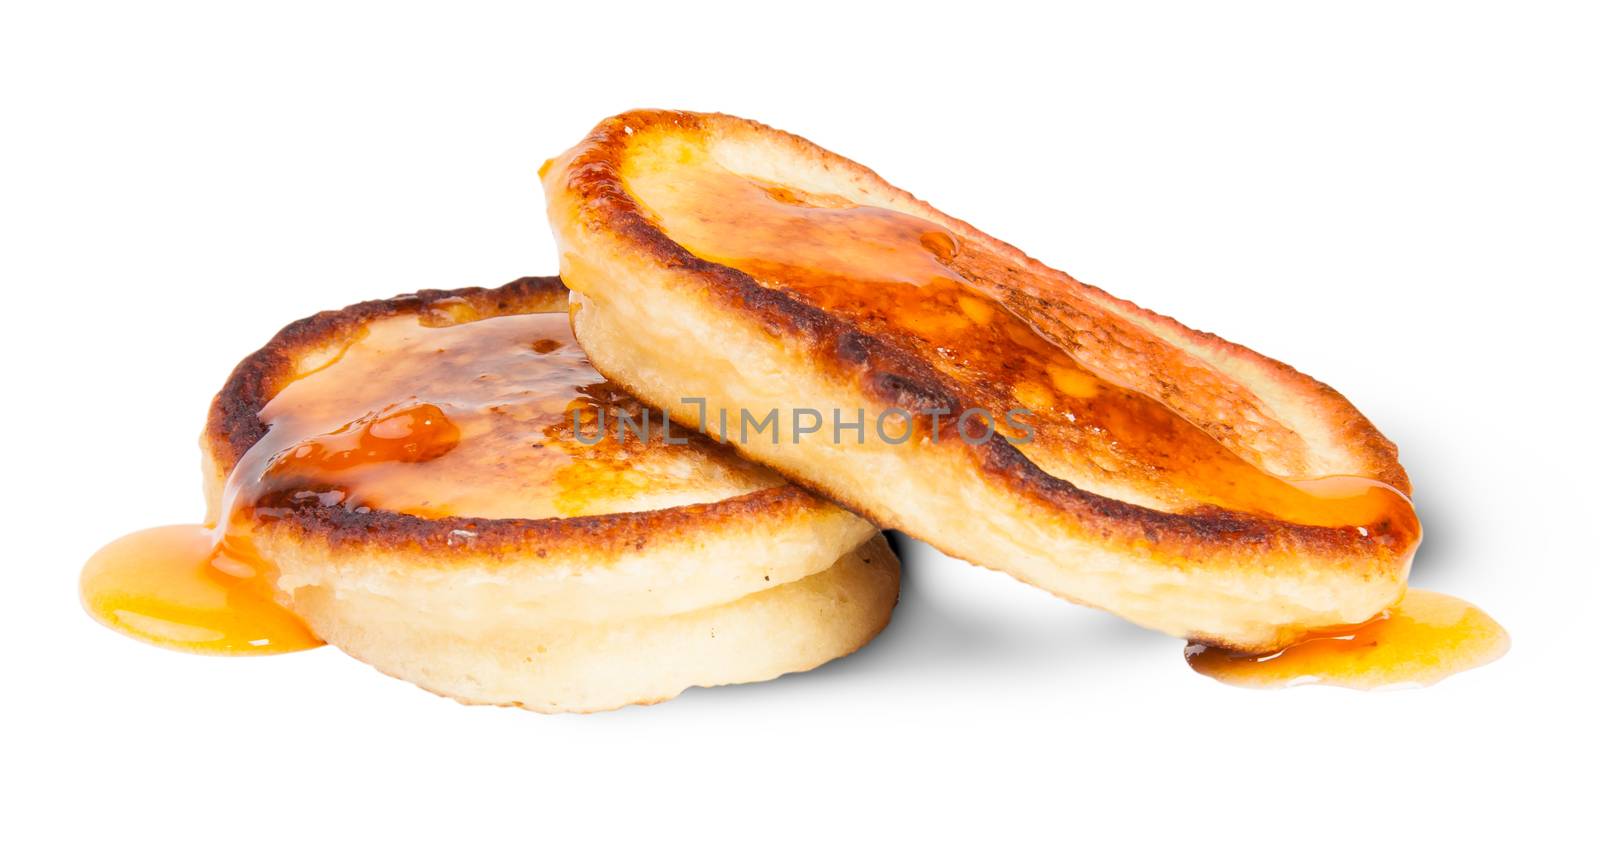 Two Sweet Pancakes With Maple Syrup Isolated On White Background